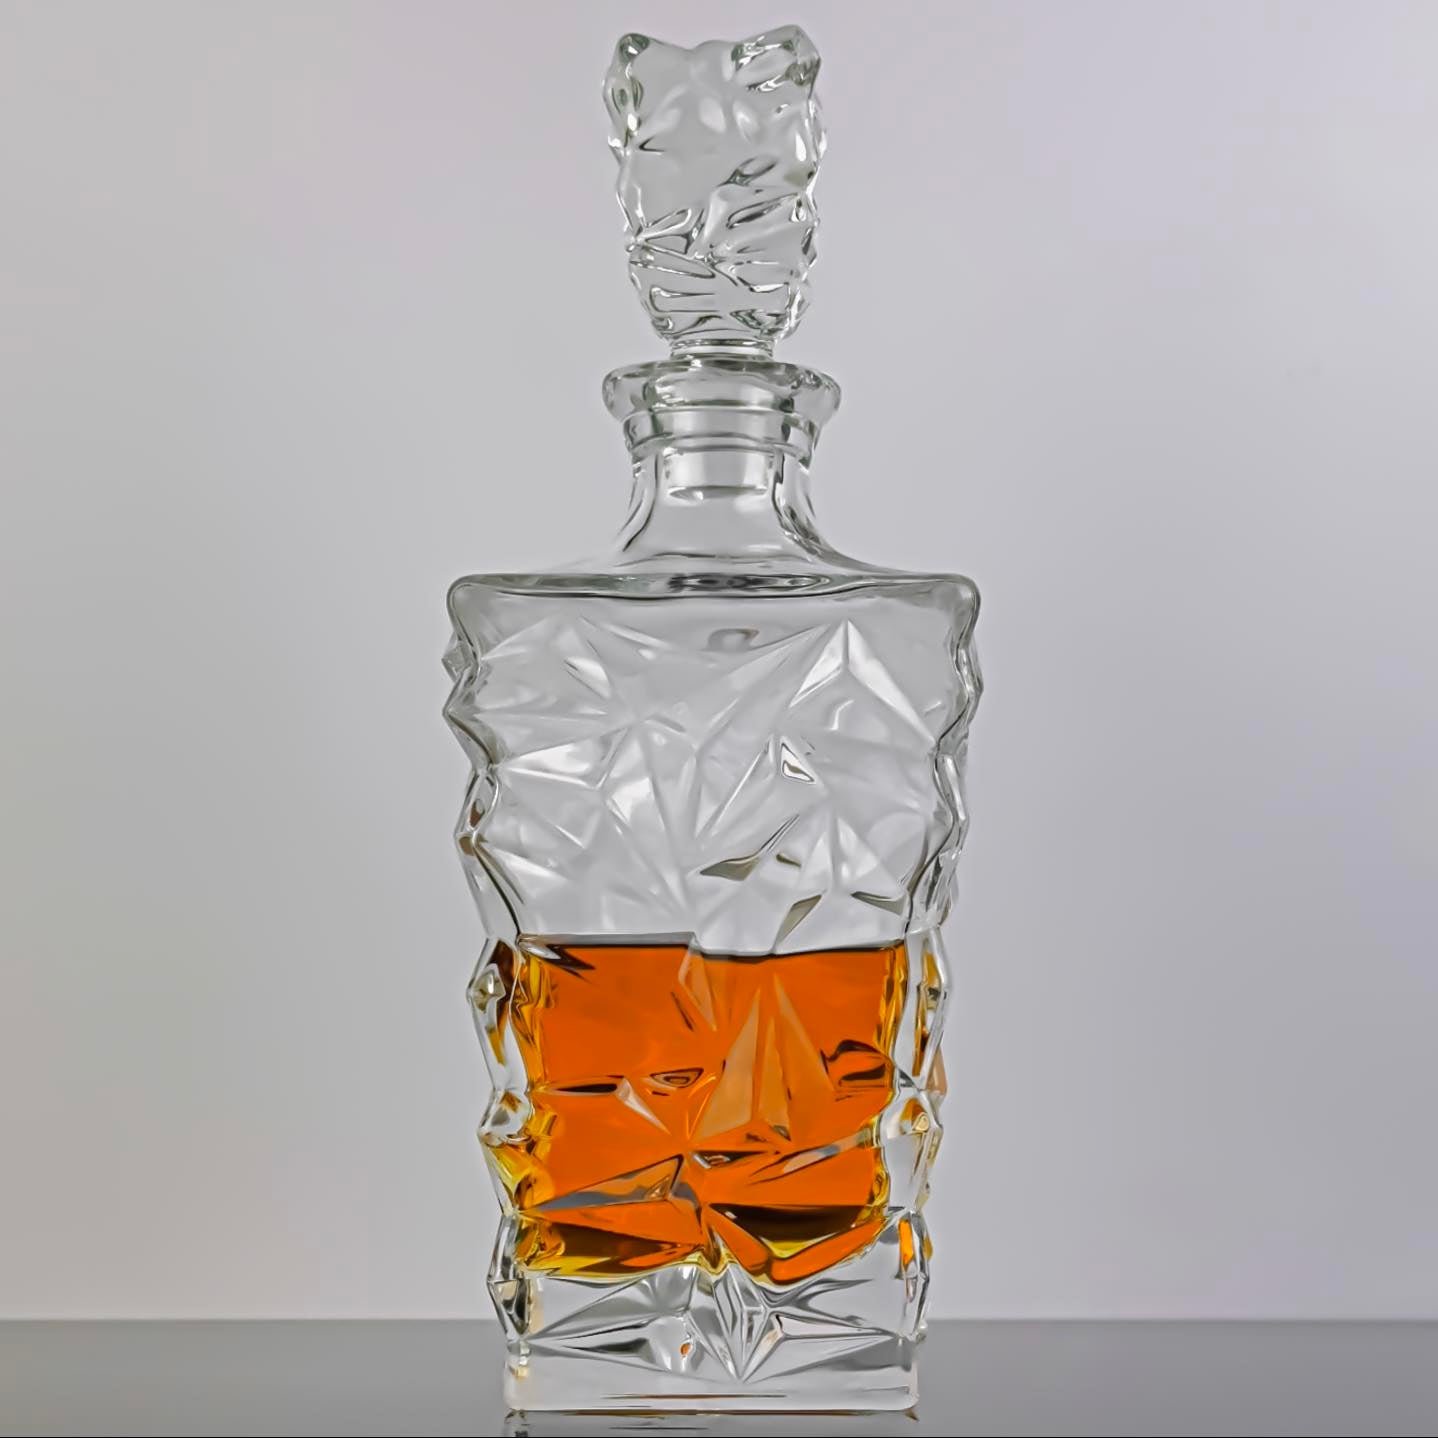 Jagged Edge Crystal Decanter Whisky